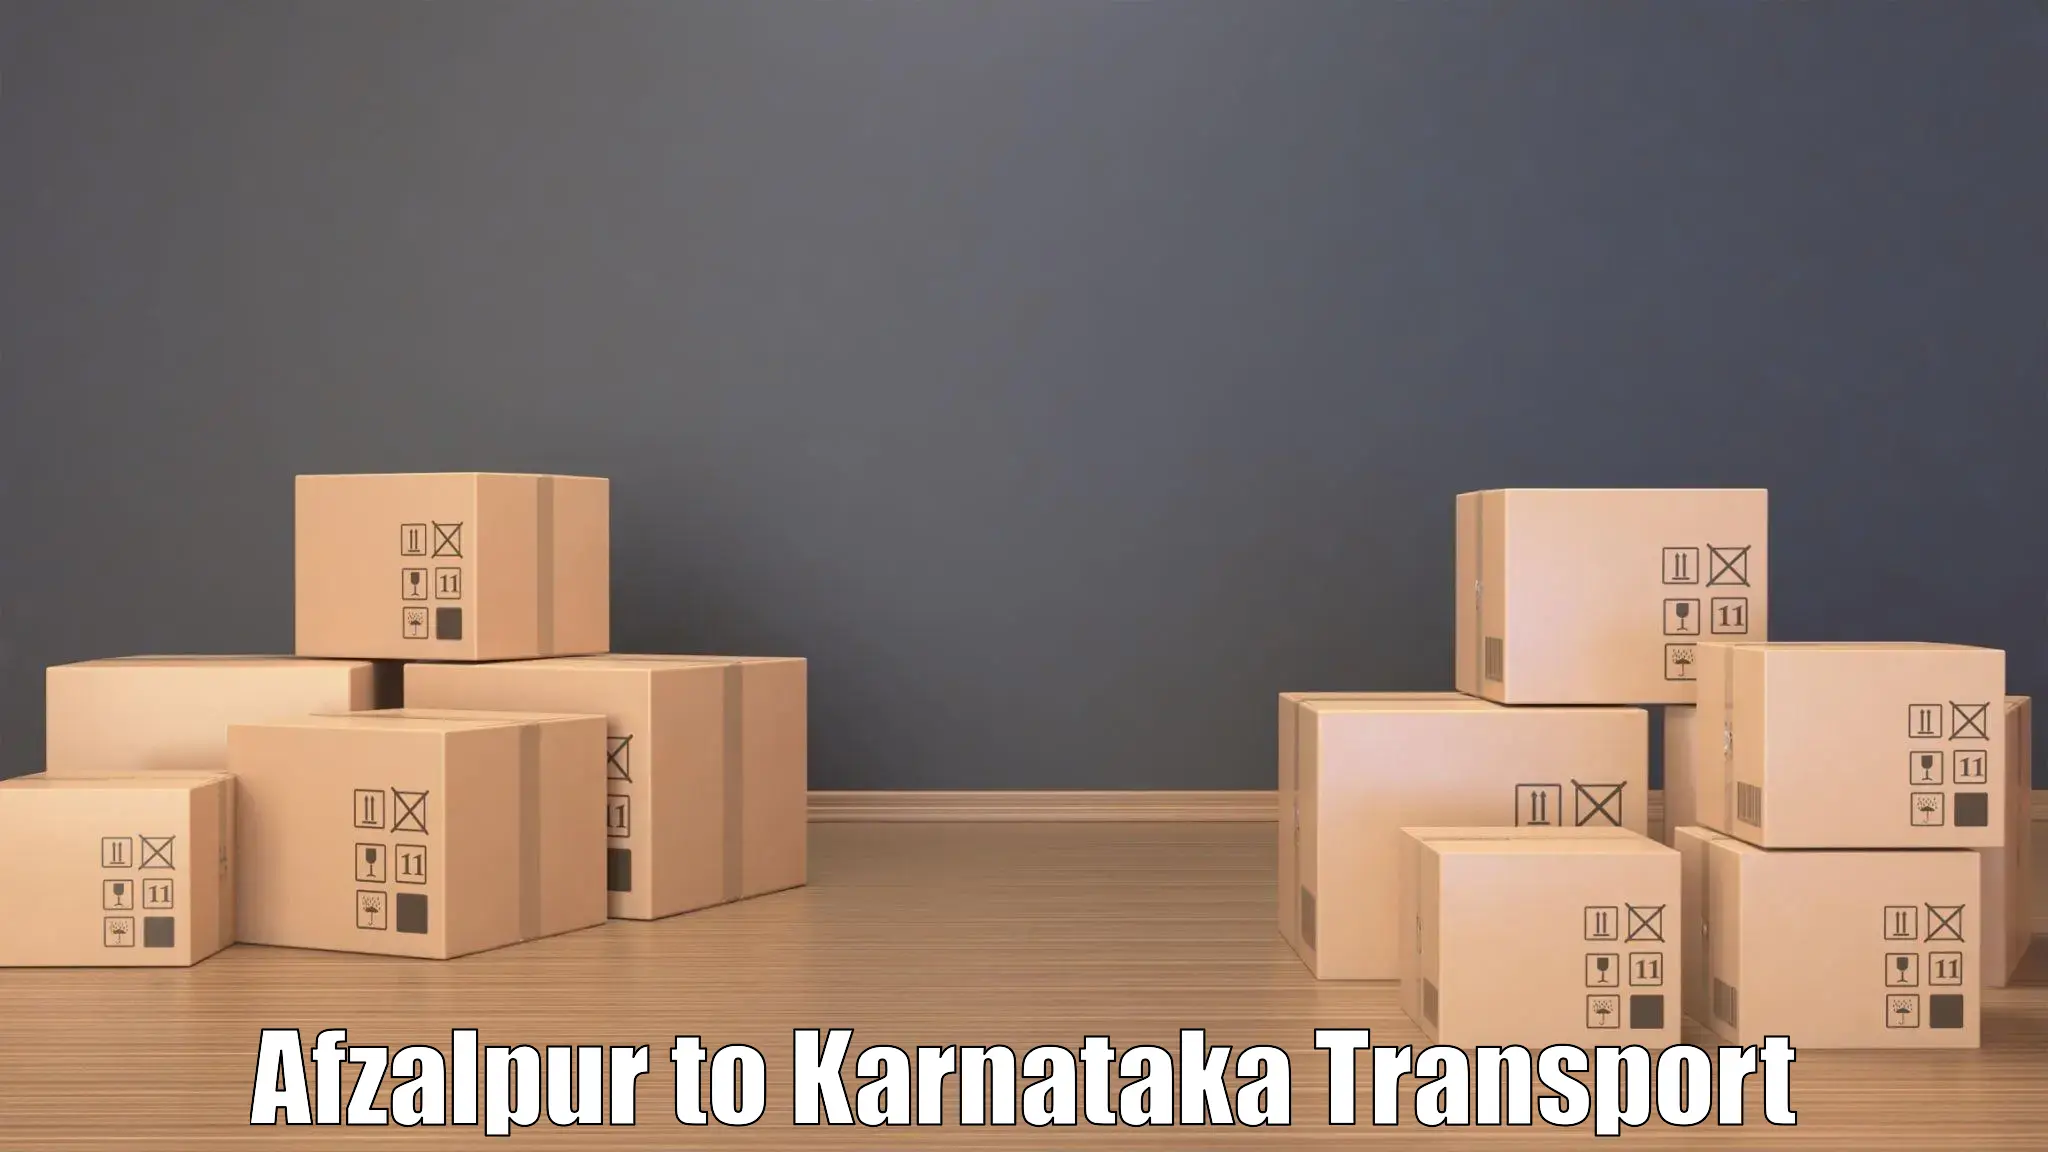 Truck transport companies in India Afzalpur to Afzalpur